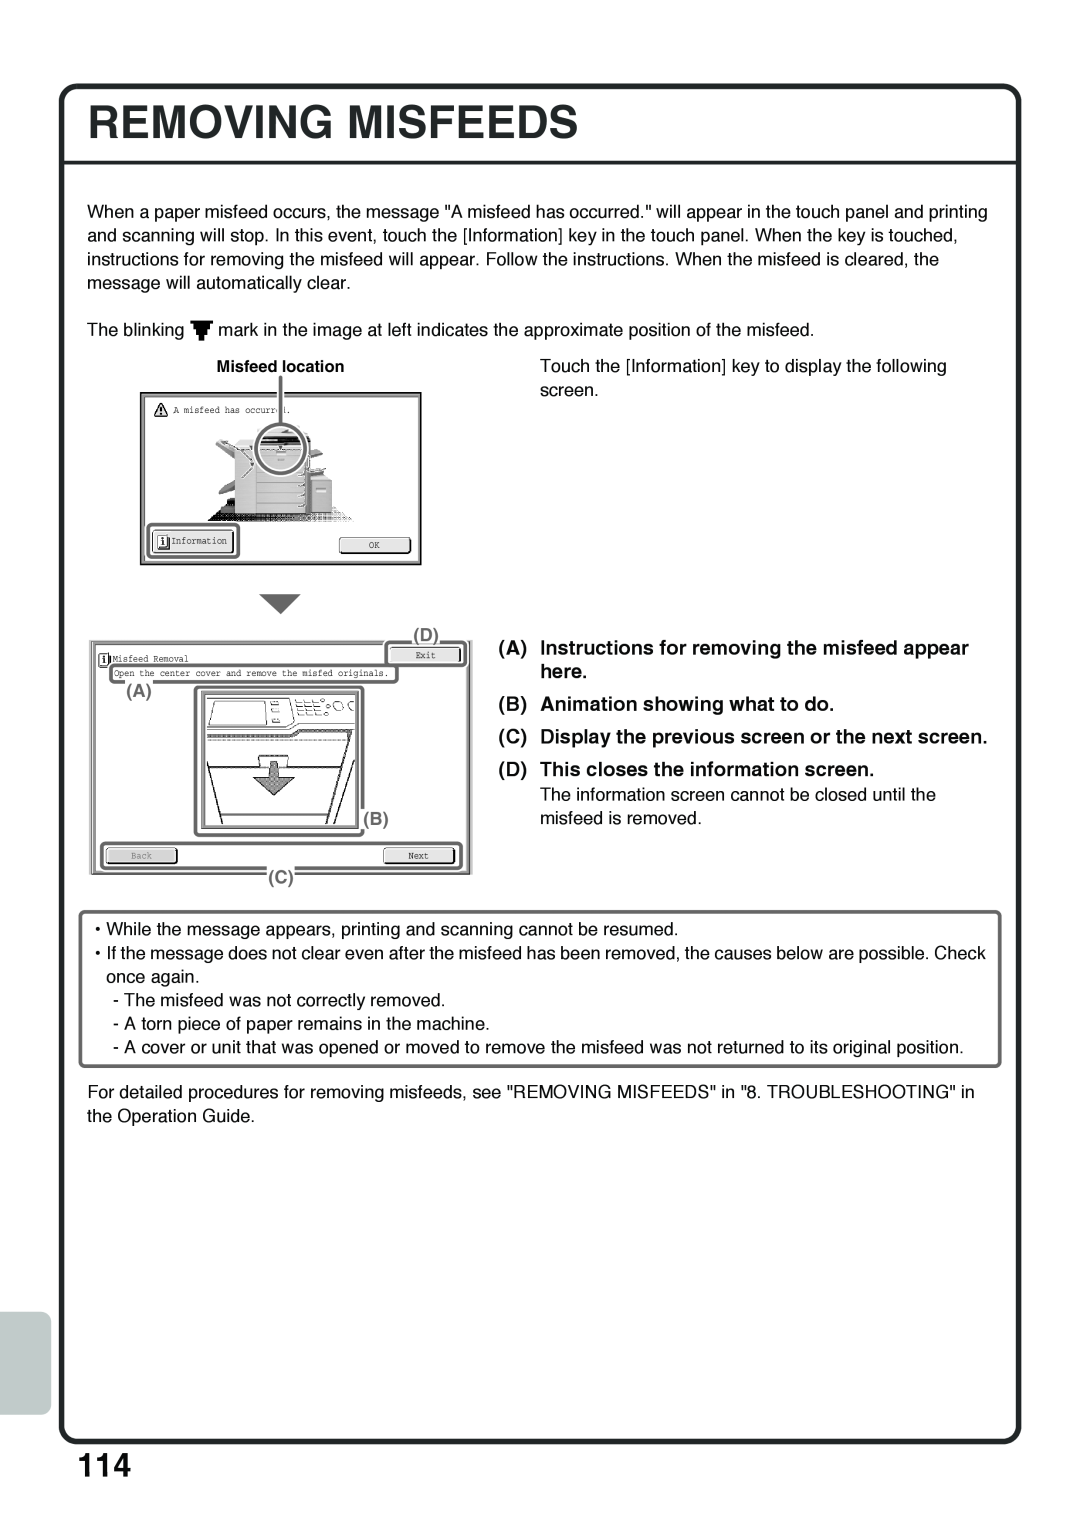 Sharp MX-4100N Removing Misfeeds, A Instructions for removing the misfeed appear here, B Animation showing what to do 